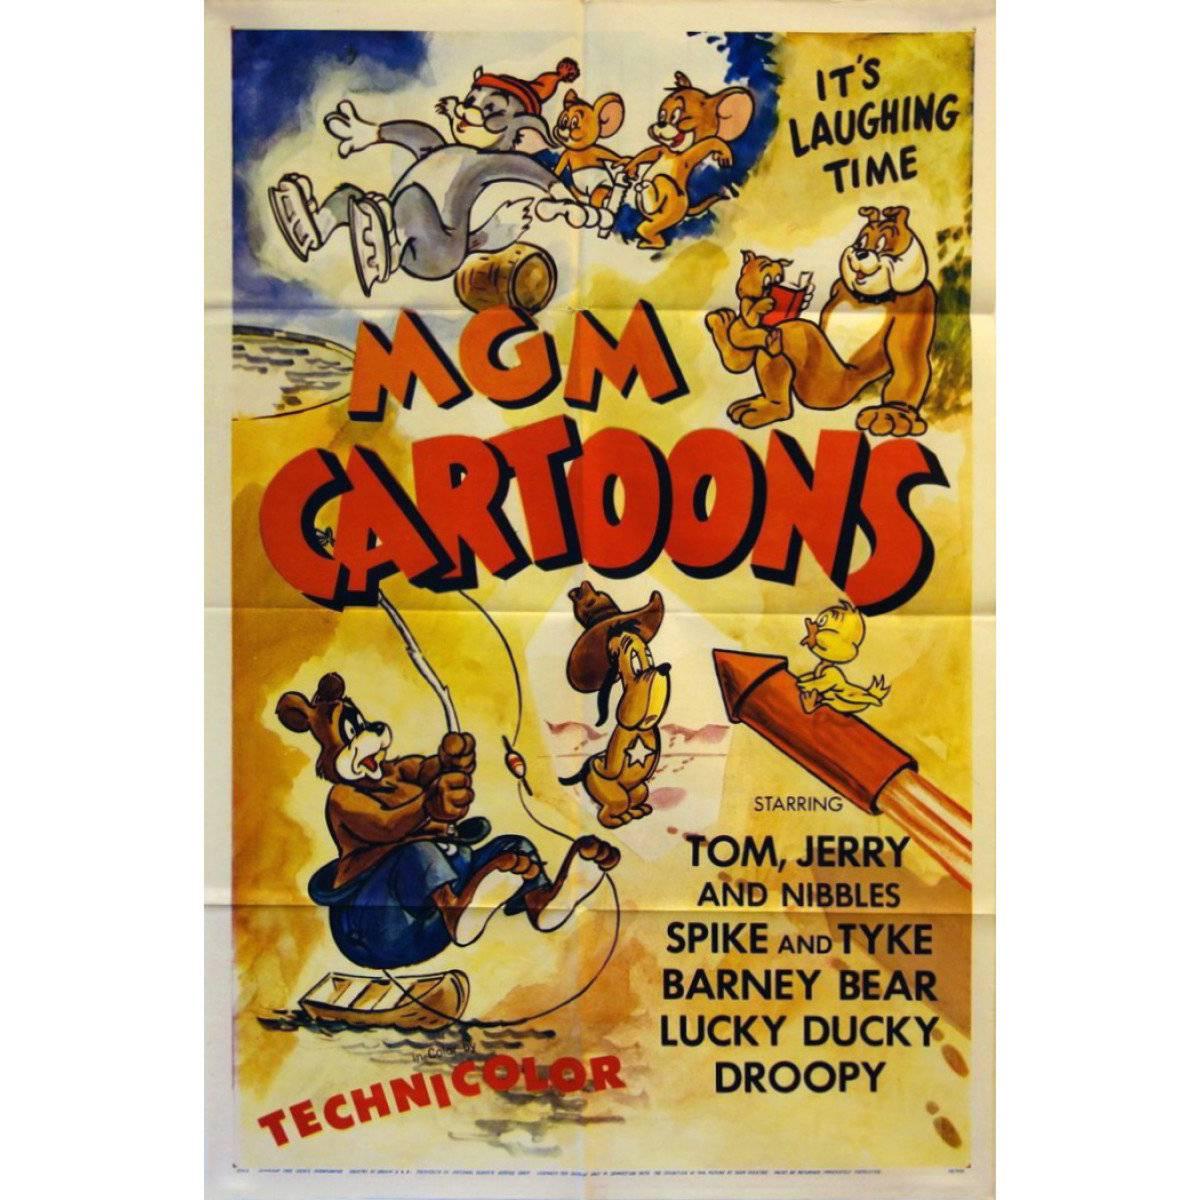 "MGM Cartoons" Film Poster, 1956 For Sale